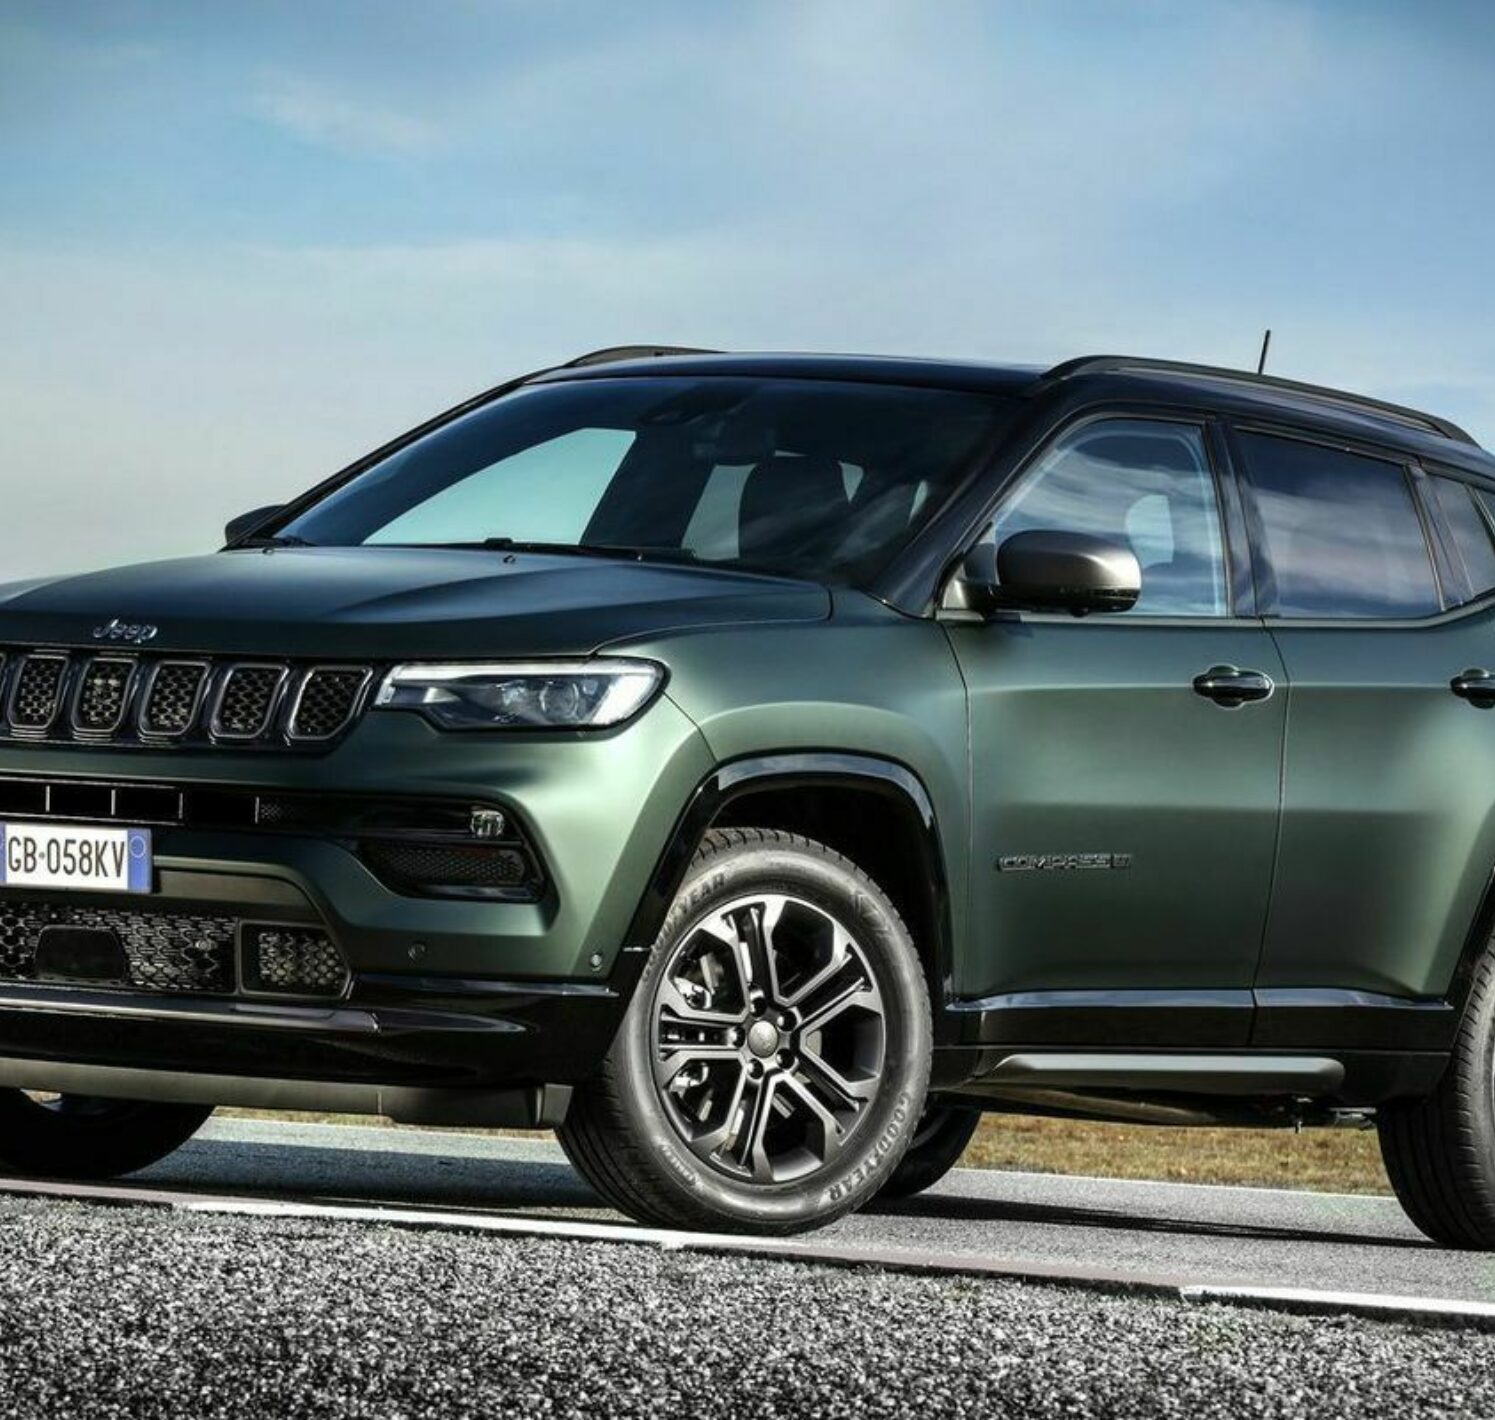 https://autofilter.sk/assets/images/compass/gallery/jeep-compass-2021_27-galeria.jpg - obrazok